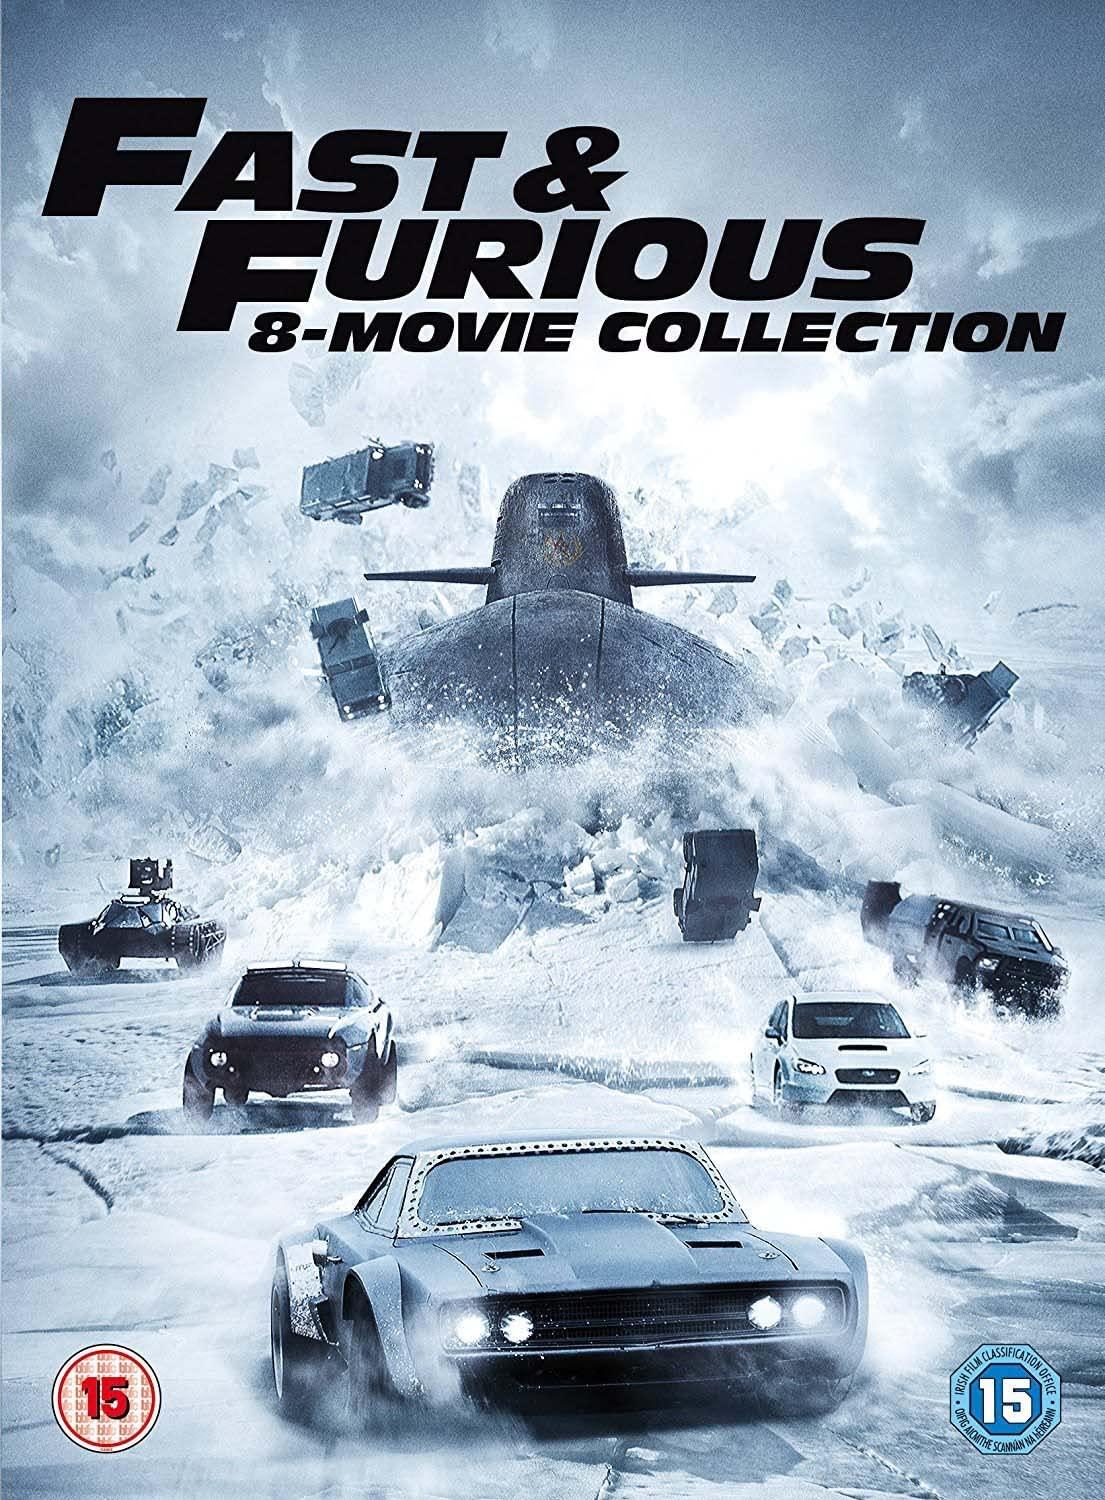 FAST & FURIOUS: 8-MOVIE COLLECTION 8DVD